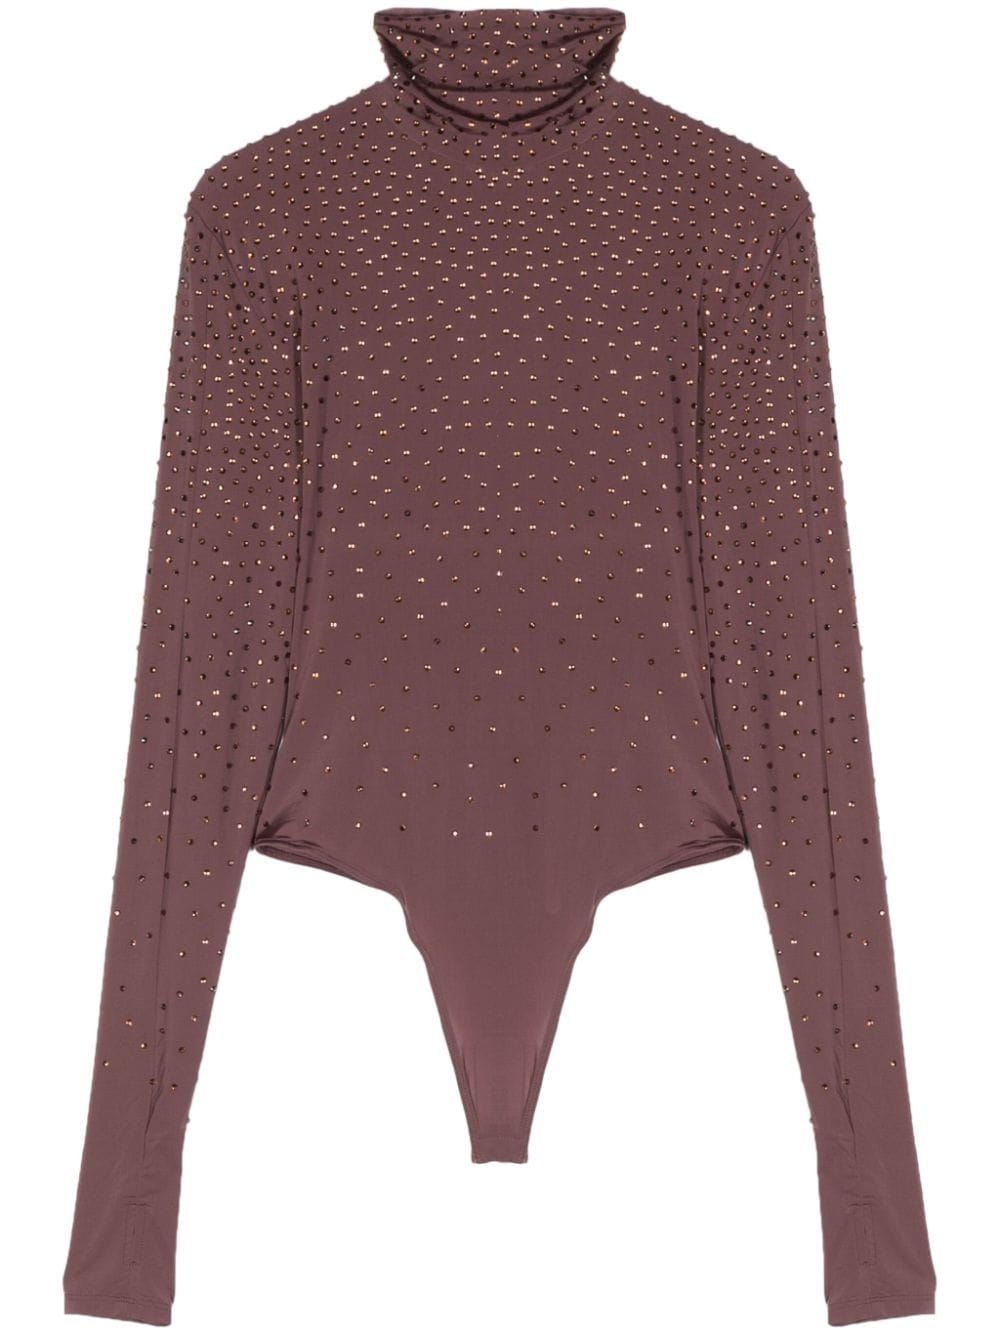 Alex Perry Rhinestone-embellished Bodysuit In Taupe Rose